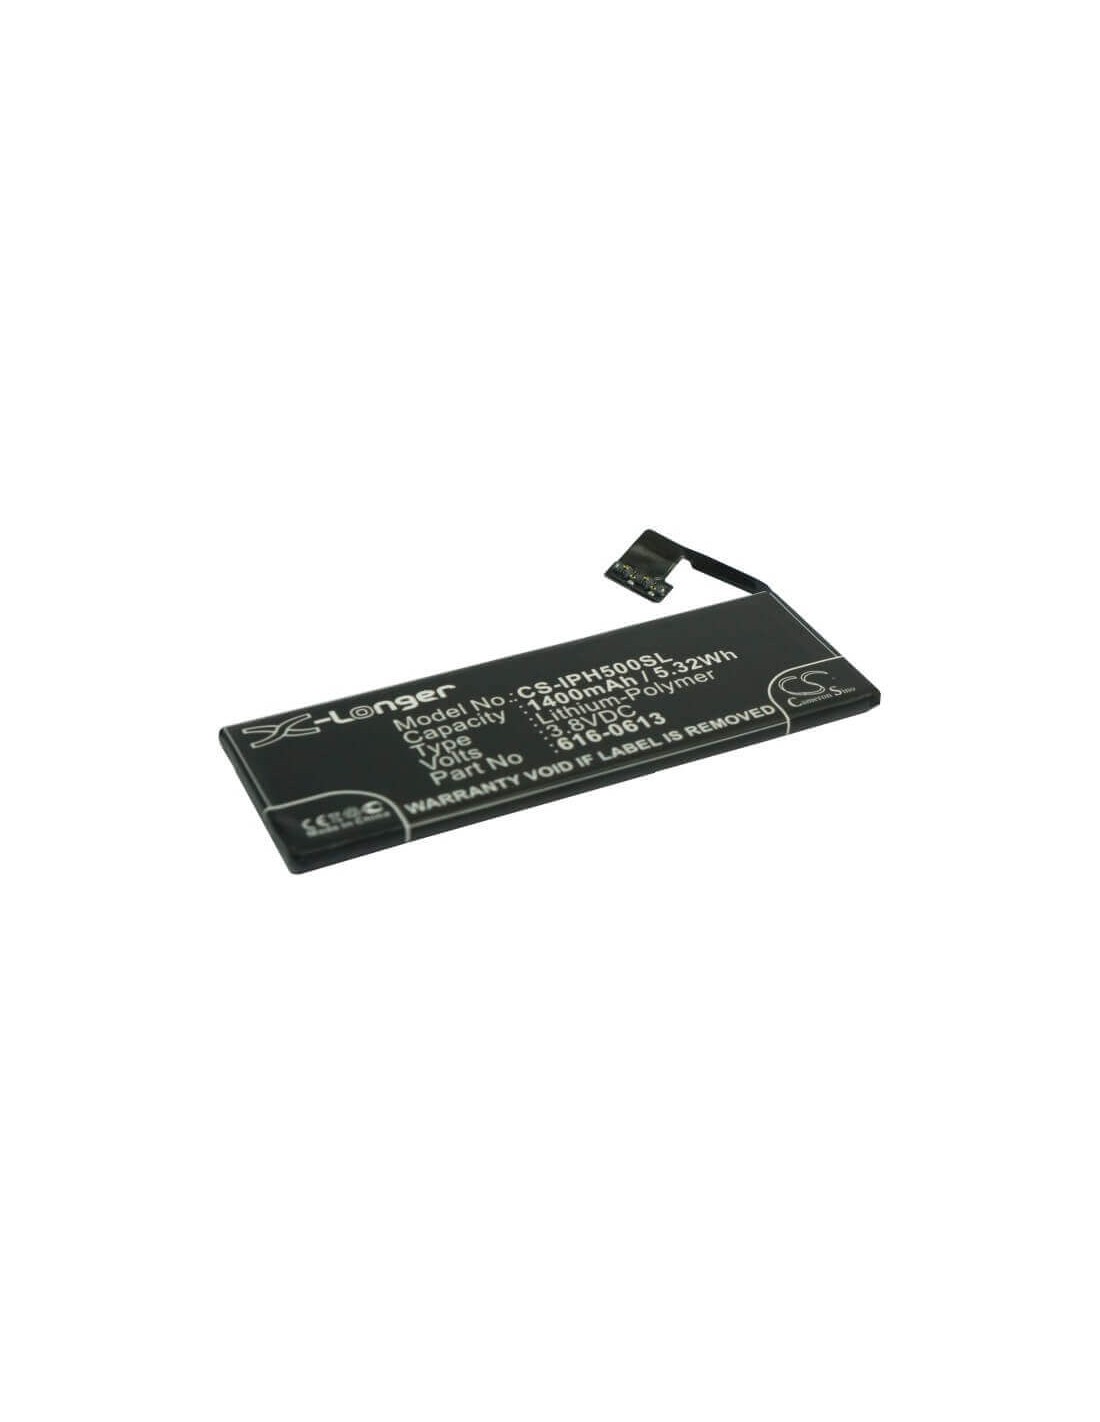 Battery for Apple iPhone 5, MD645LL/A, MD644LL/A 3.8V, 1400mAh - 5.32Wh